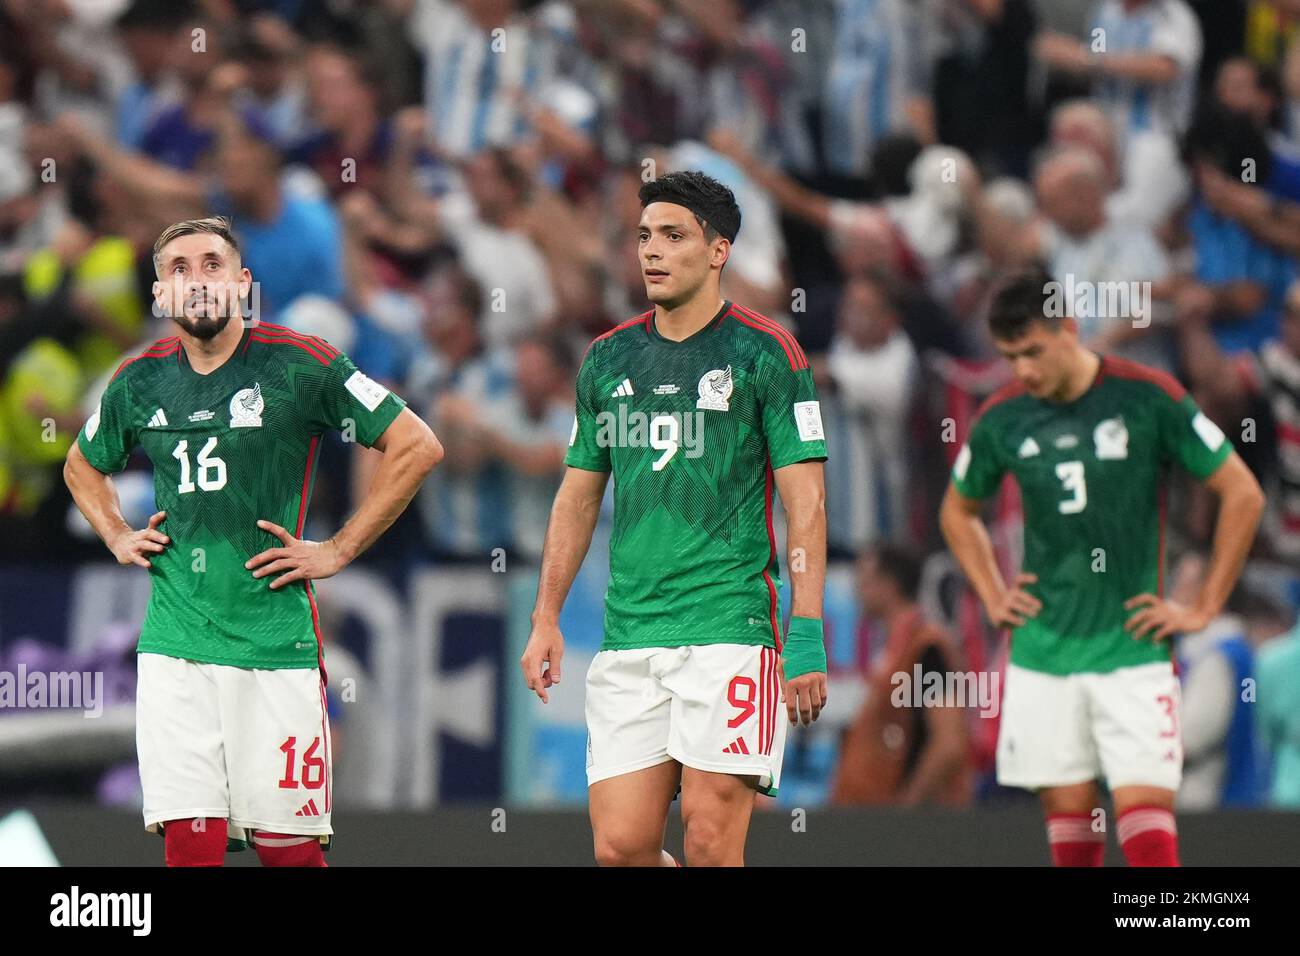 Raul Jimenez and Hector Herrera of Mexico during the FIFA World Cup Qatar 2022 match, Group C, between Argentina and Mexico played at Lusail Stadium on Nov 26, 2022 in Lusail, Qatar. (Photo by Bagu Blanco / PRESSIN) Credit: PRESSINPHOTO SPORTS AGENCY/Alamy Live News Stock Photo